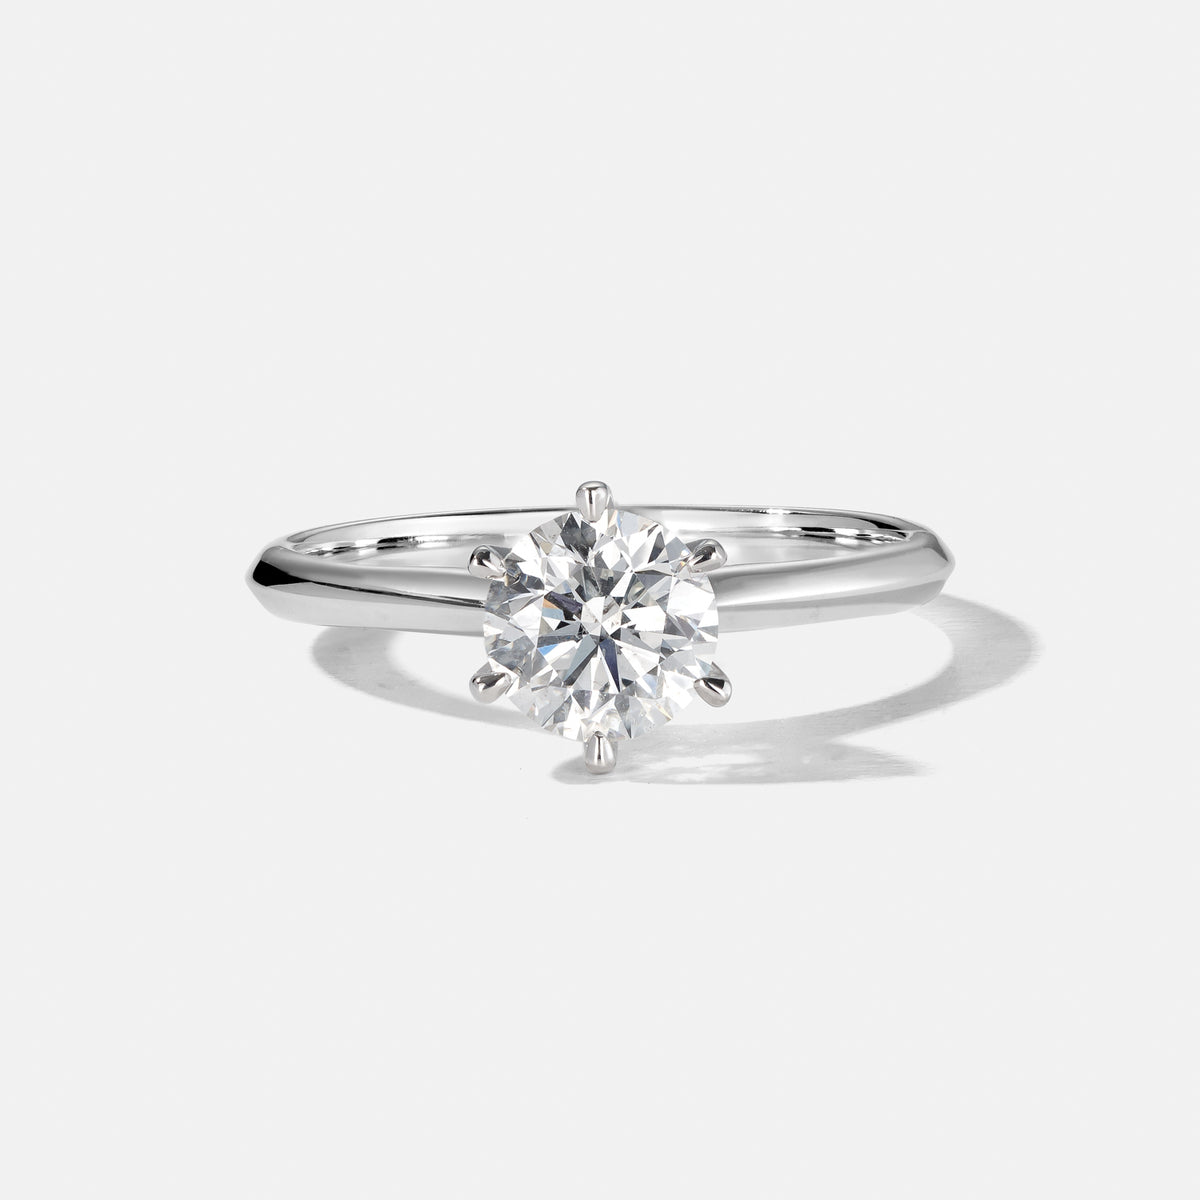 Brilliant 6 Claw Engagement Ring